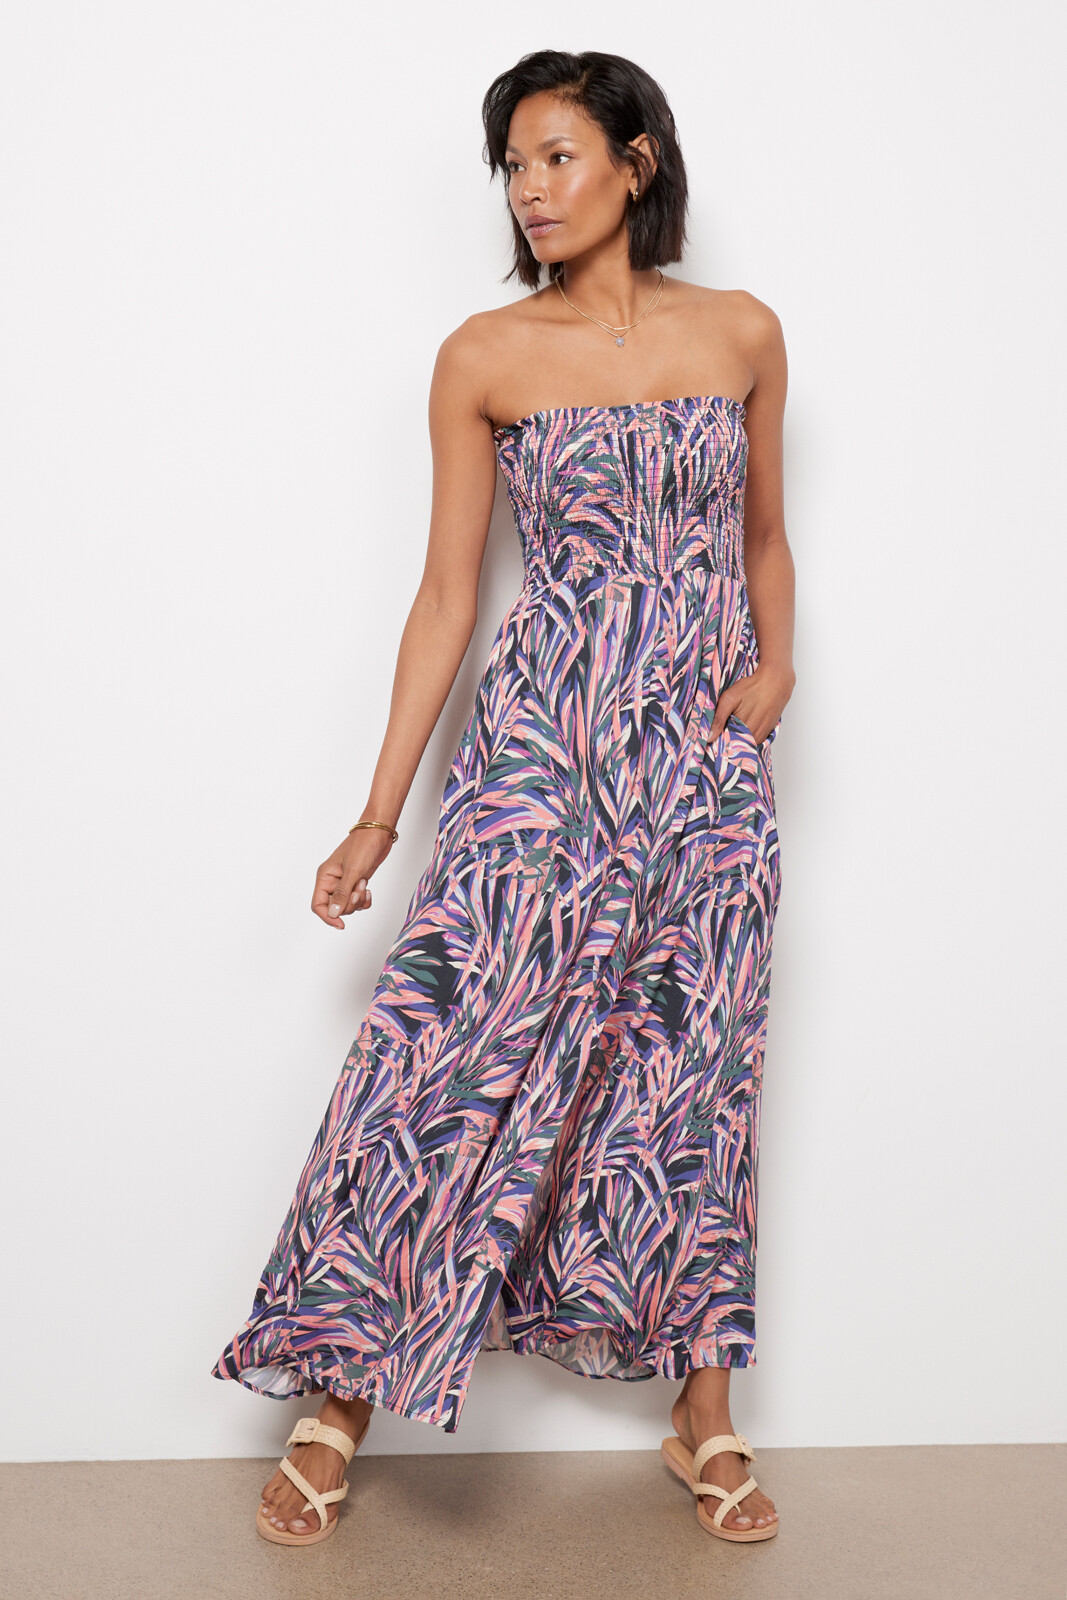 Travel Must Have - Strapless Dress